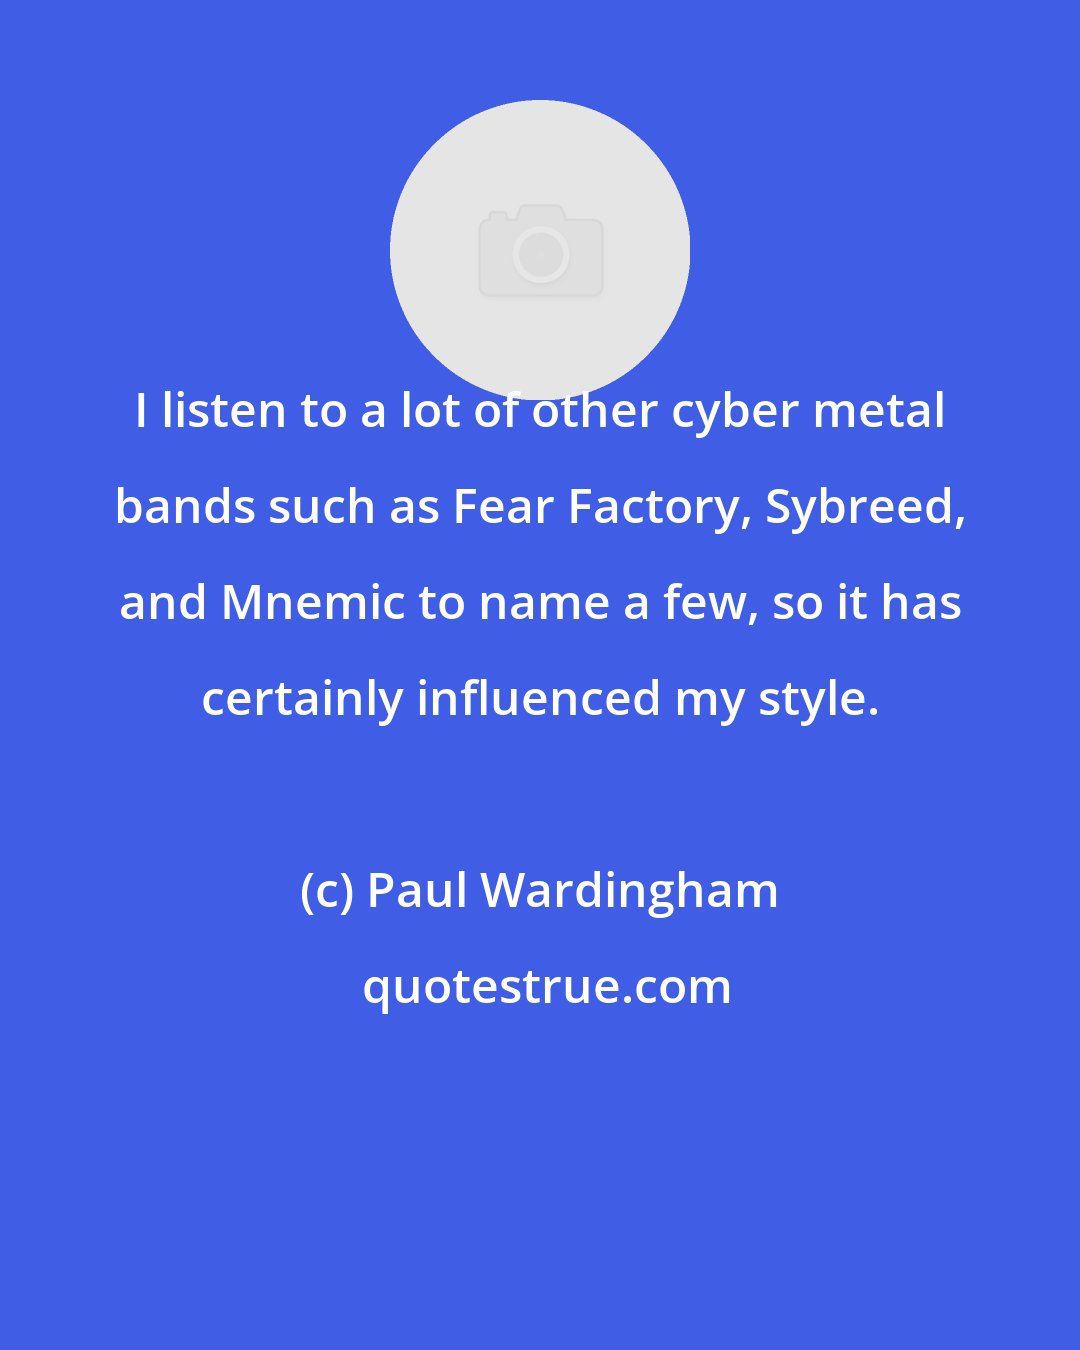 Paul Wardingham: I listen to a lot of other cyber metal bands such as Fear Factory, Sybreed, and Mnemic to name a few, so it has certainly influenced my style.